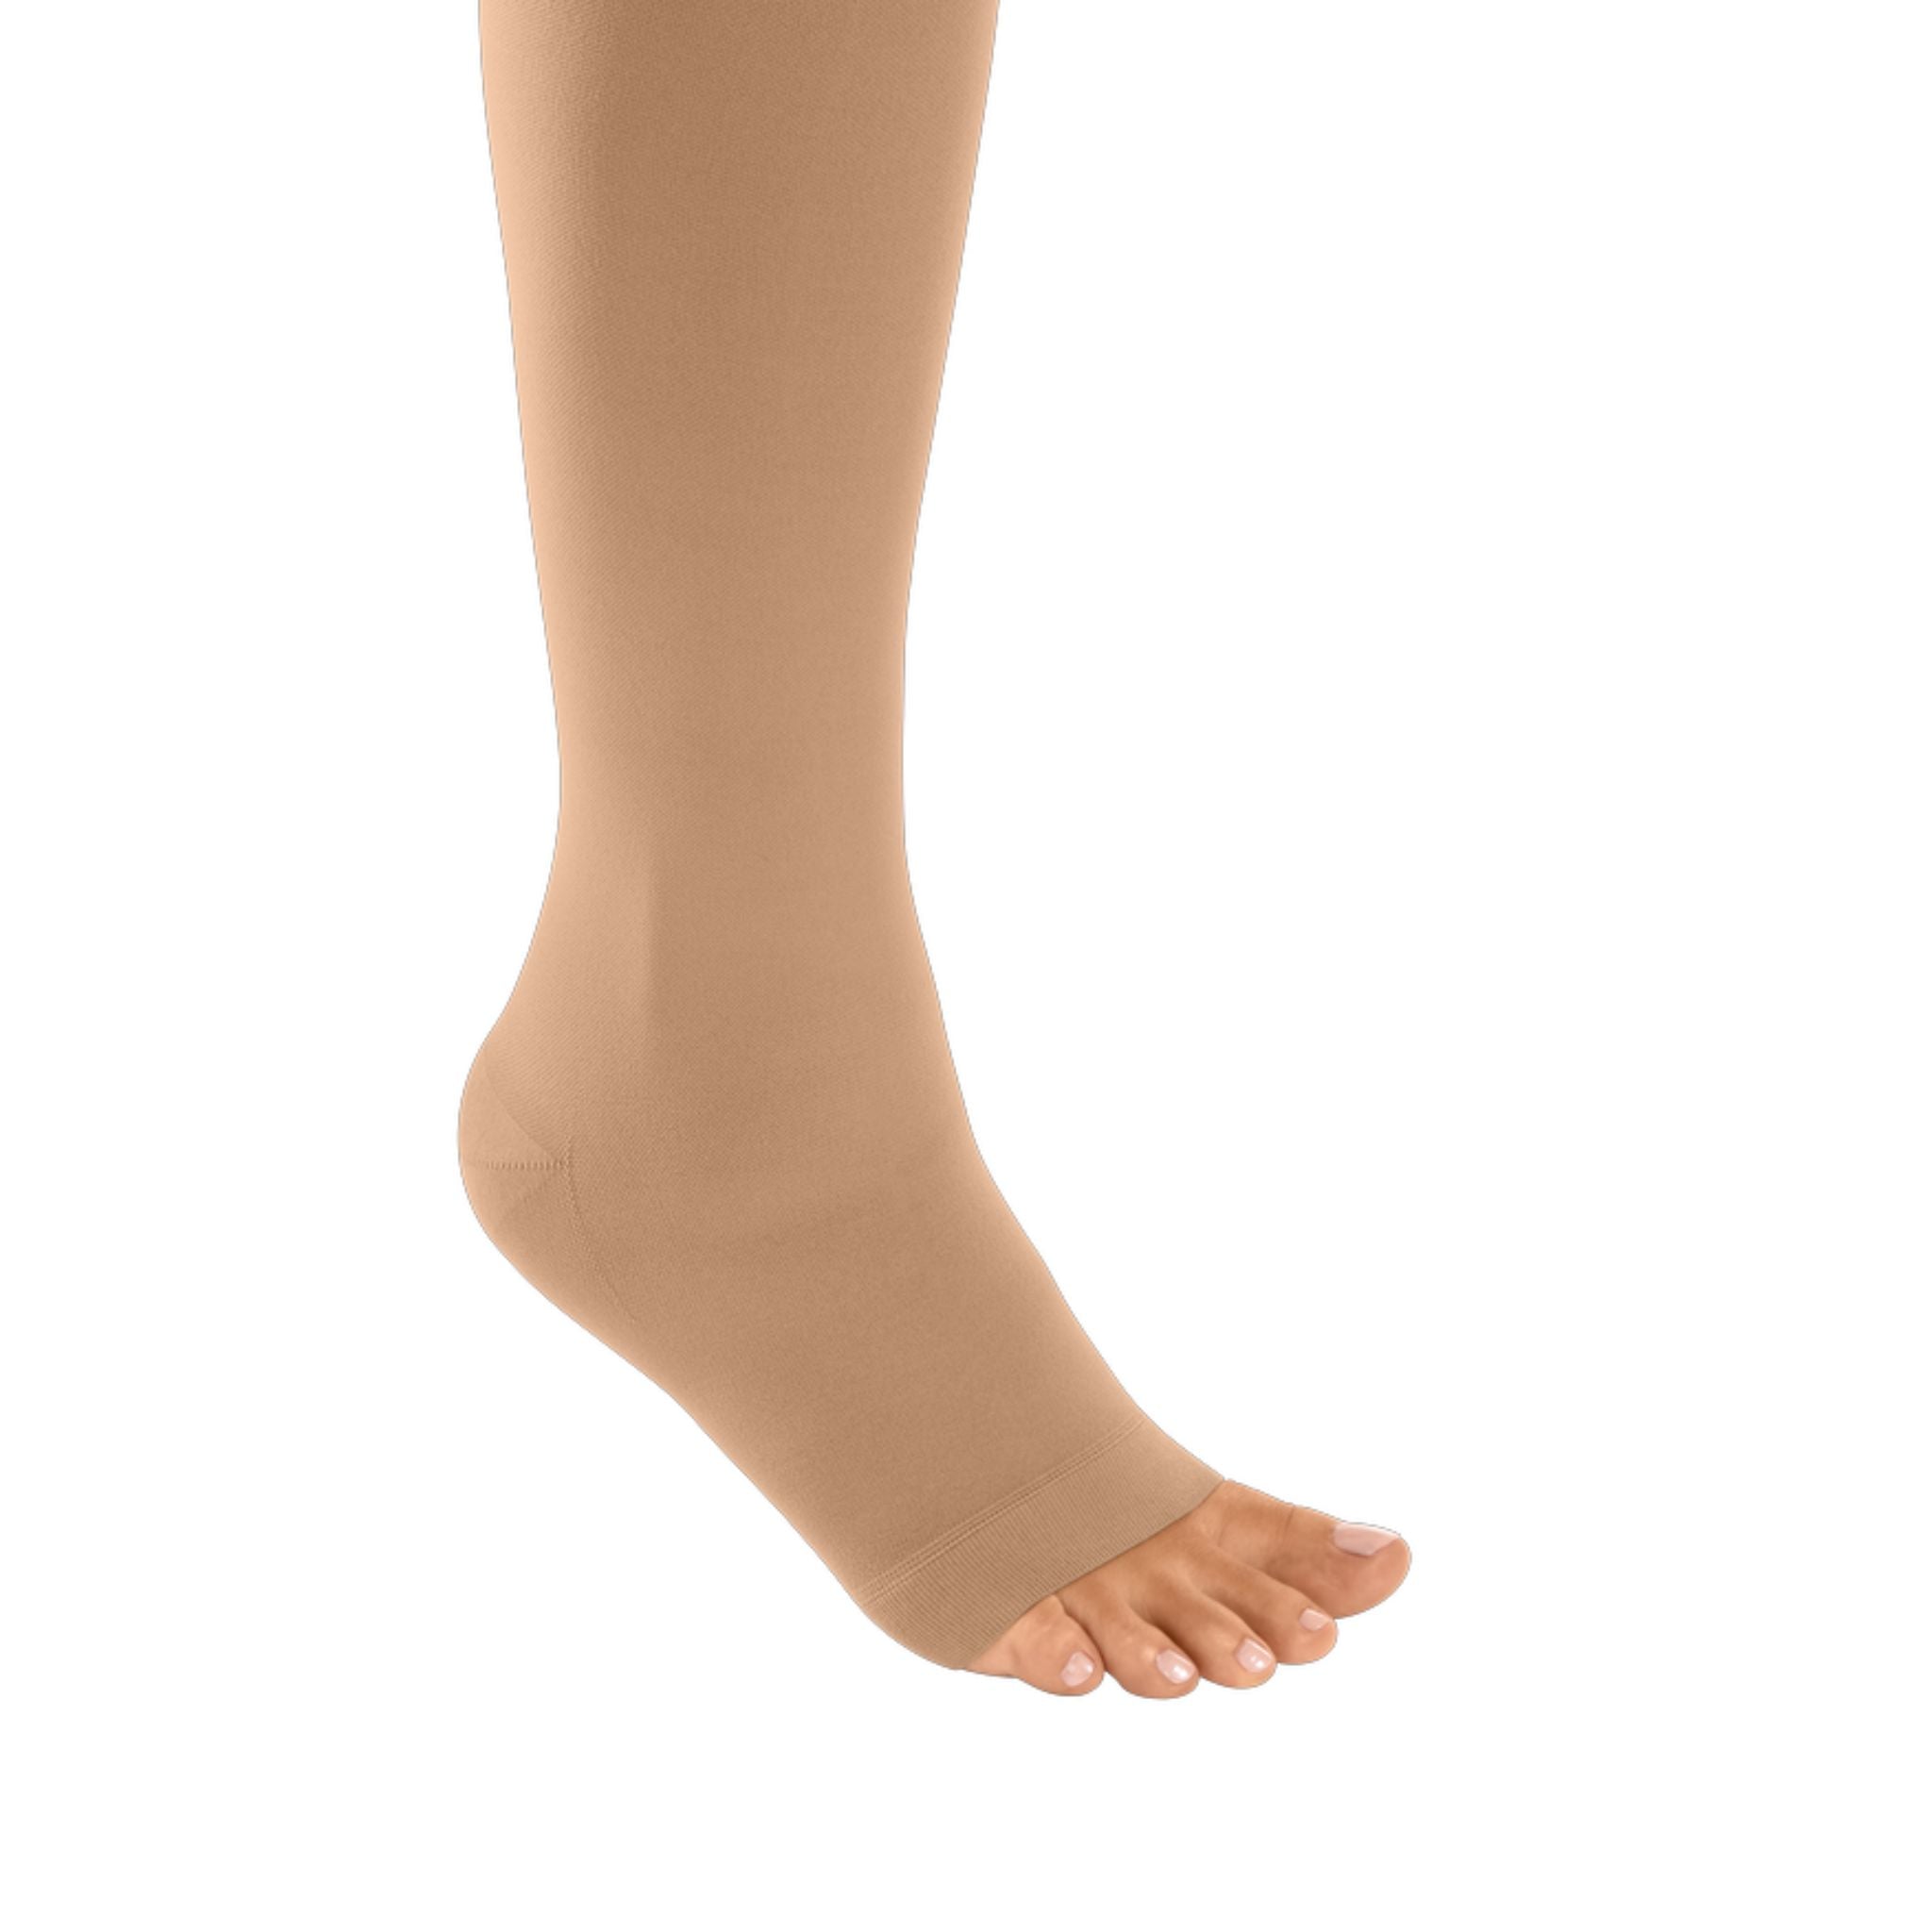 Compression Stockings  Thigh High  Silicone Topband Wide  Open Toe  Caramel  mediven cotton